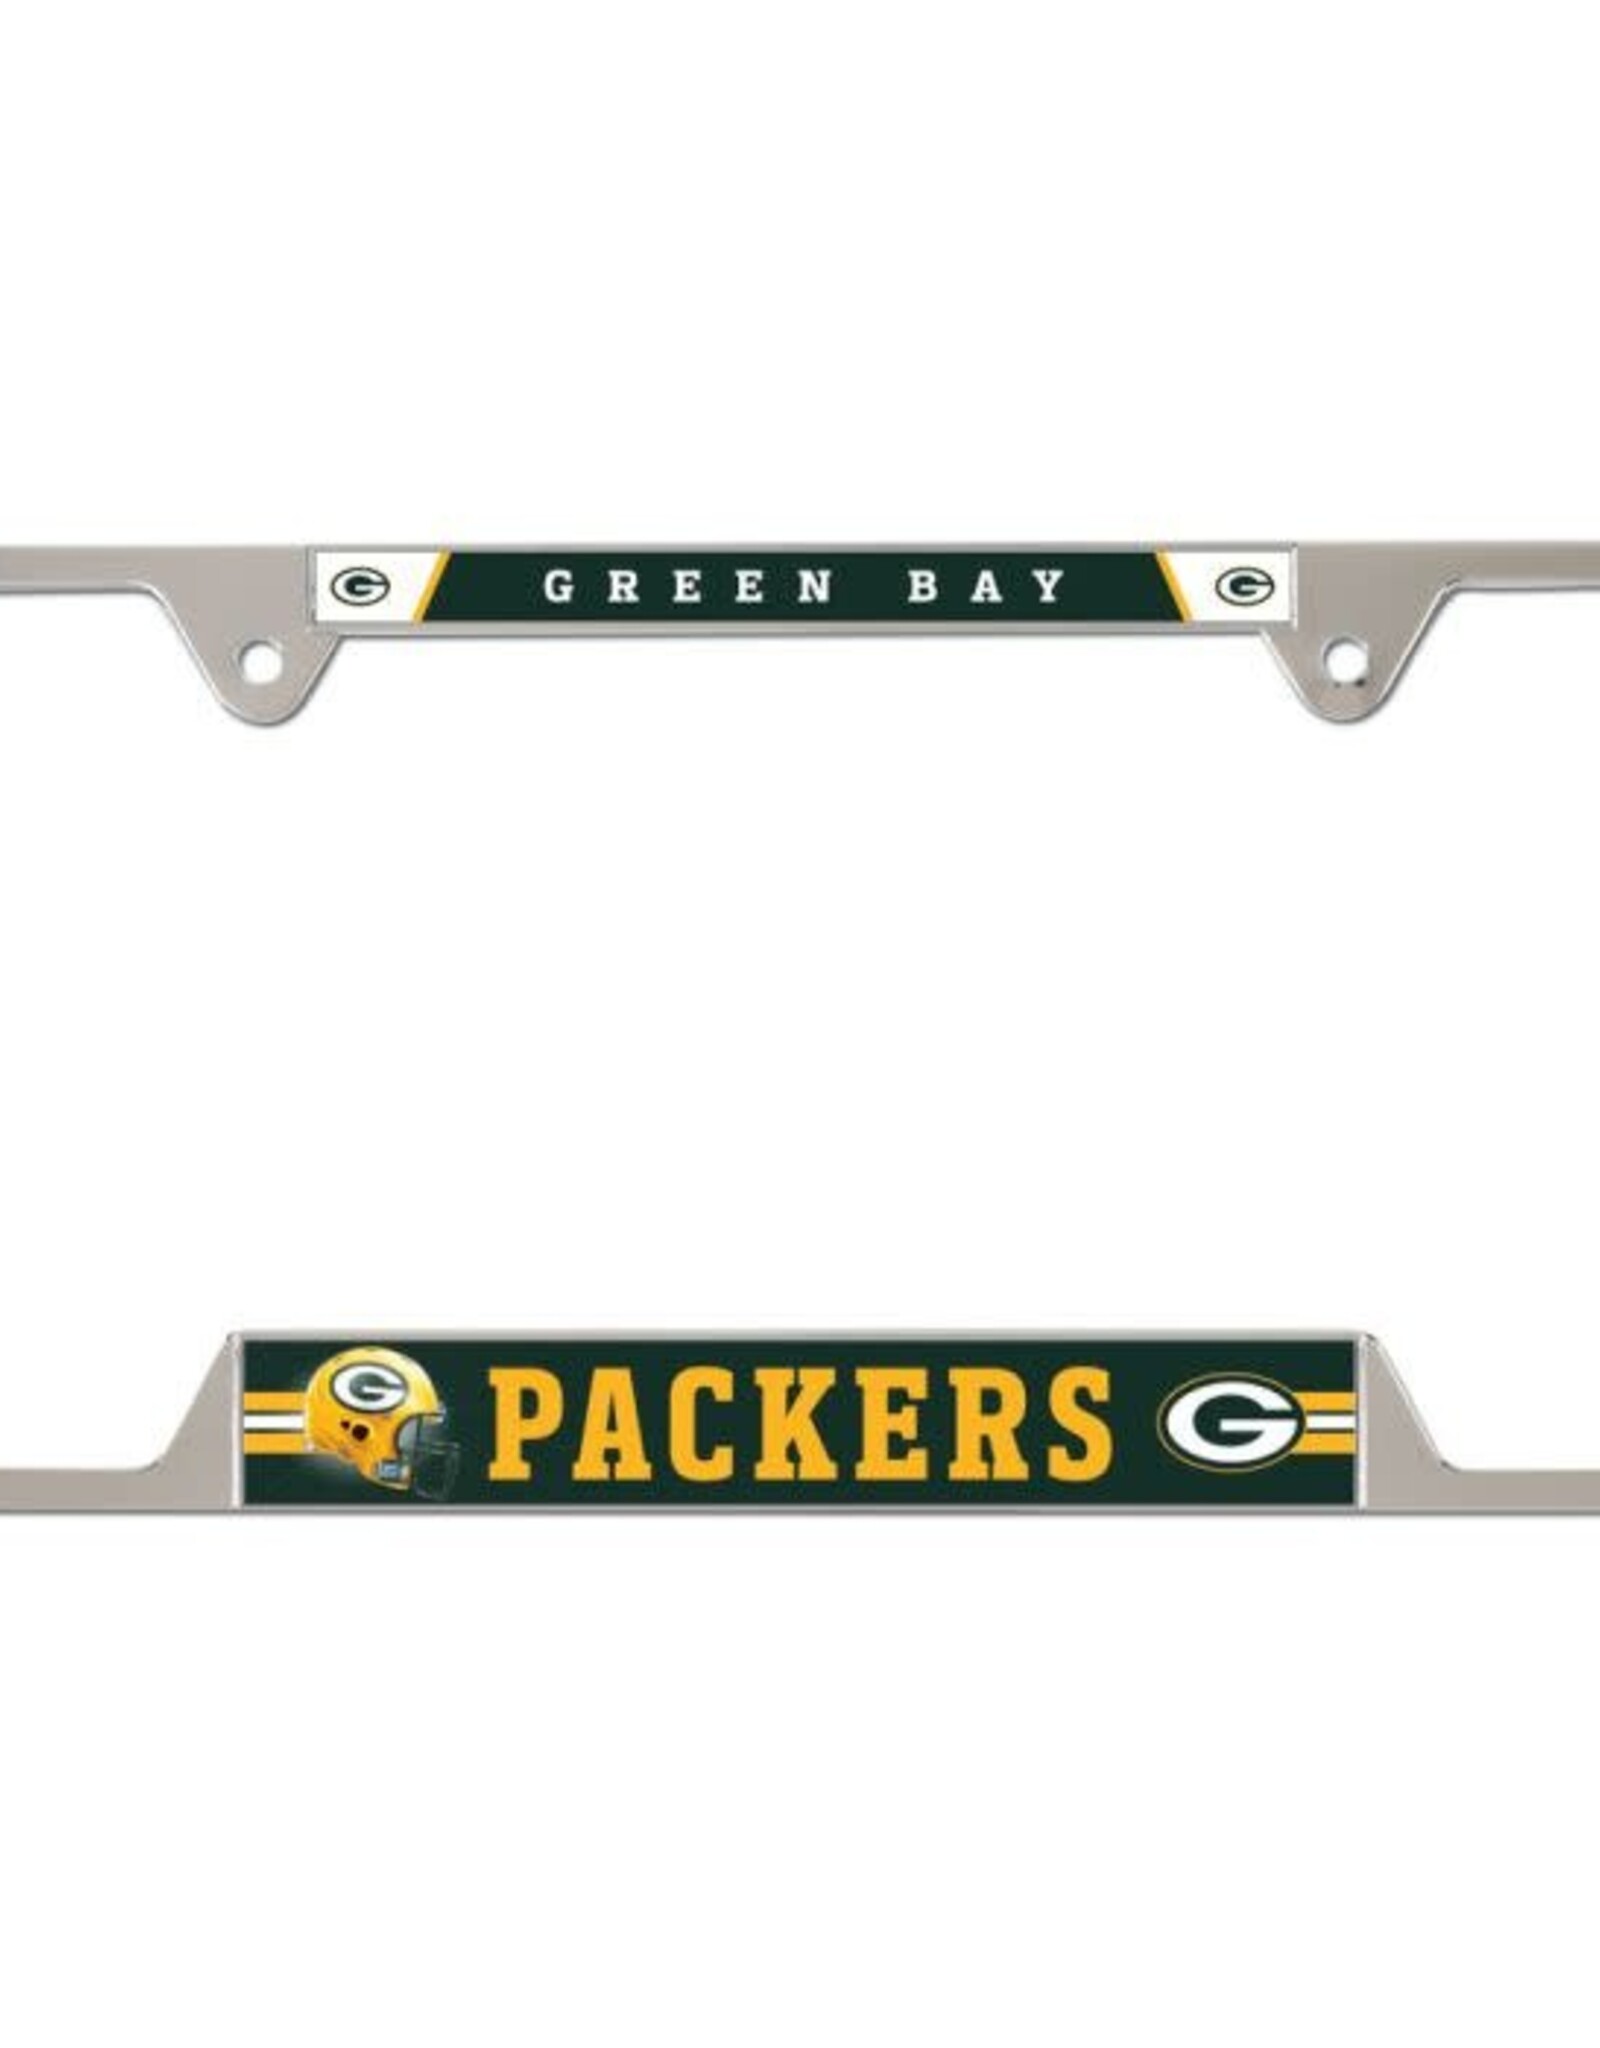 WINCRAFT Green Bay Packers Metal License Plate Frame